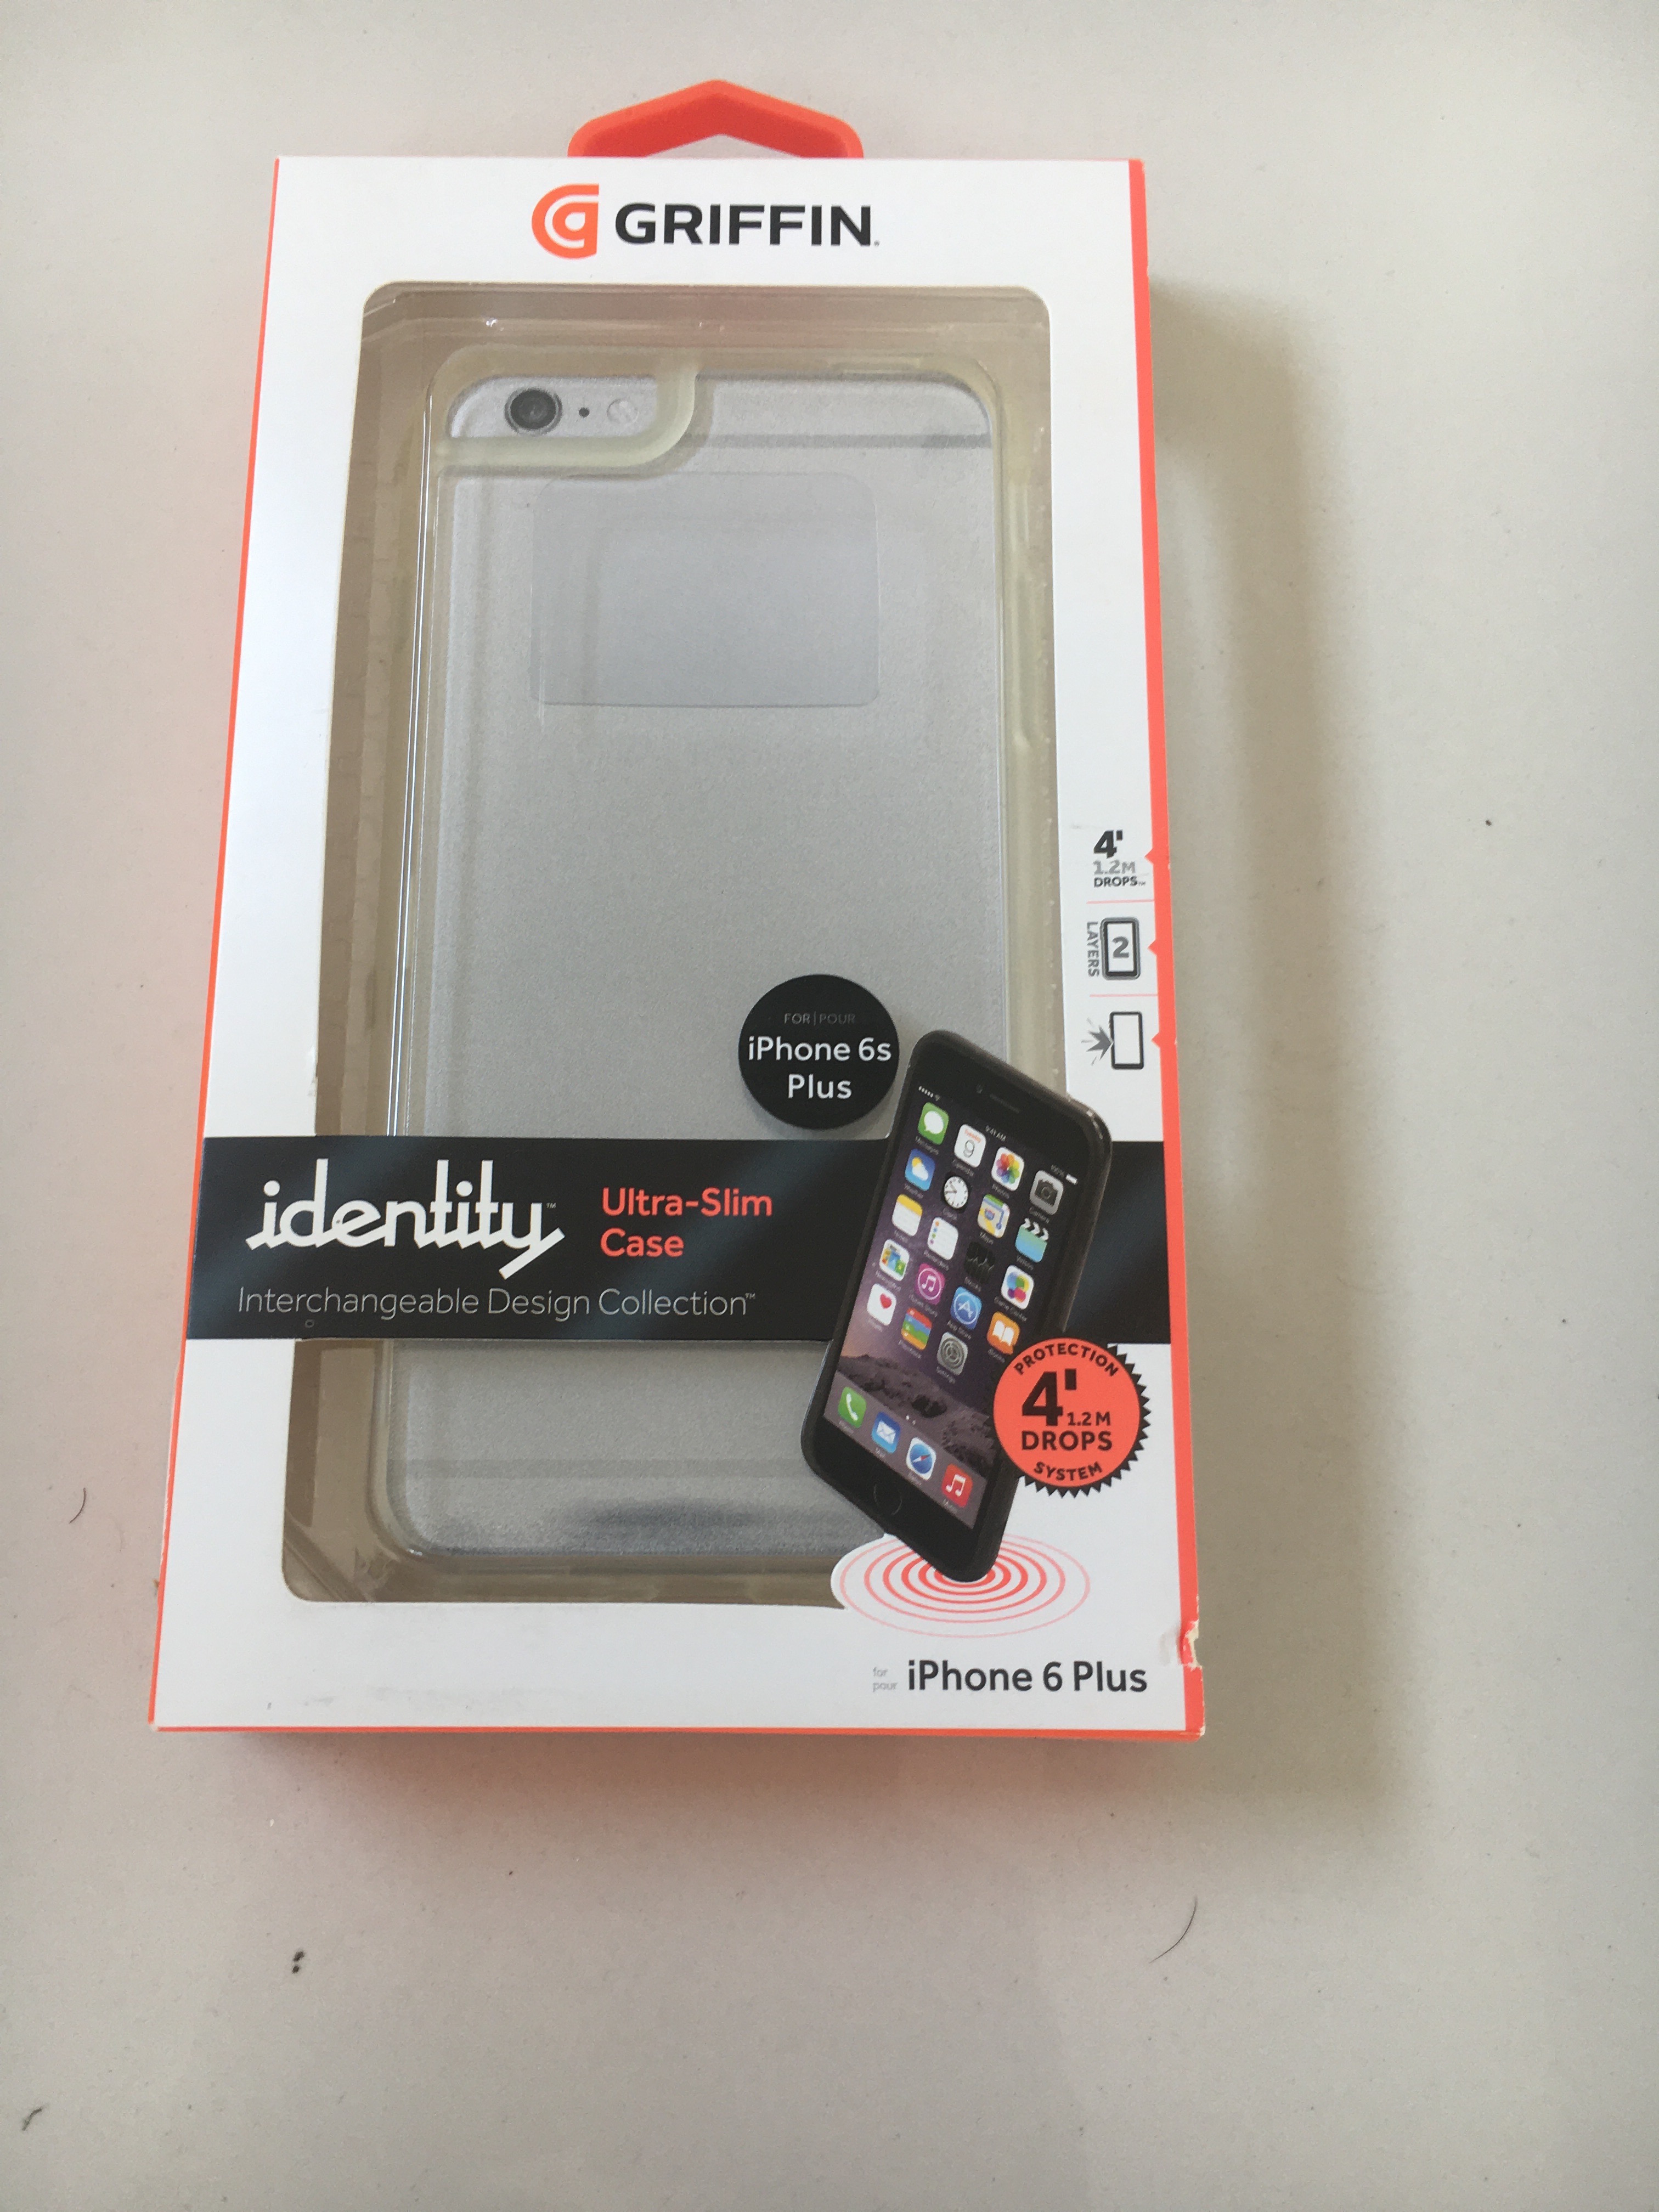 50 x Genuine Griffin Identity iPhone 6/6s PLUS Cases RETAIL PACKED NEW